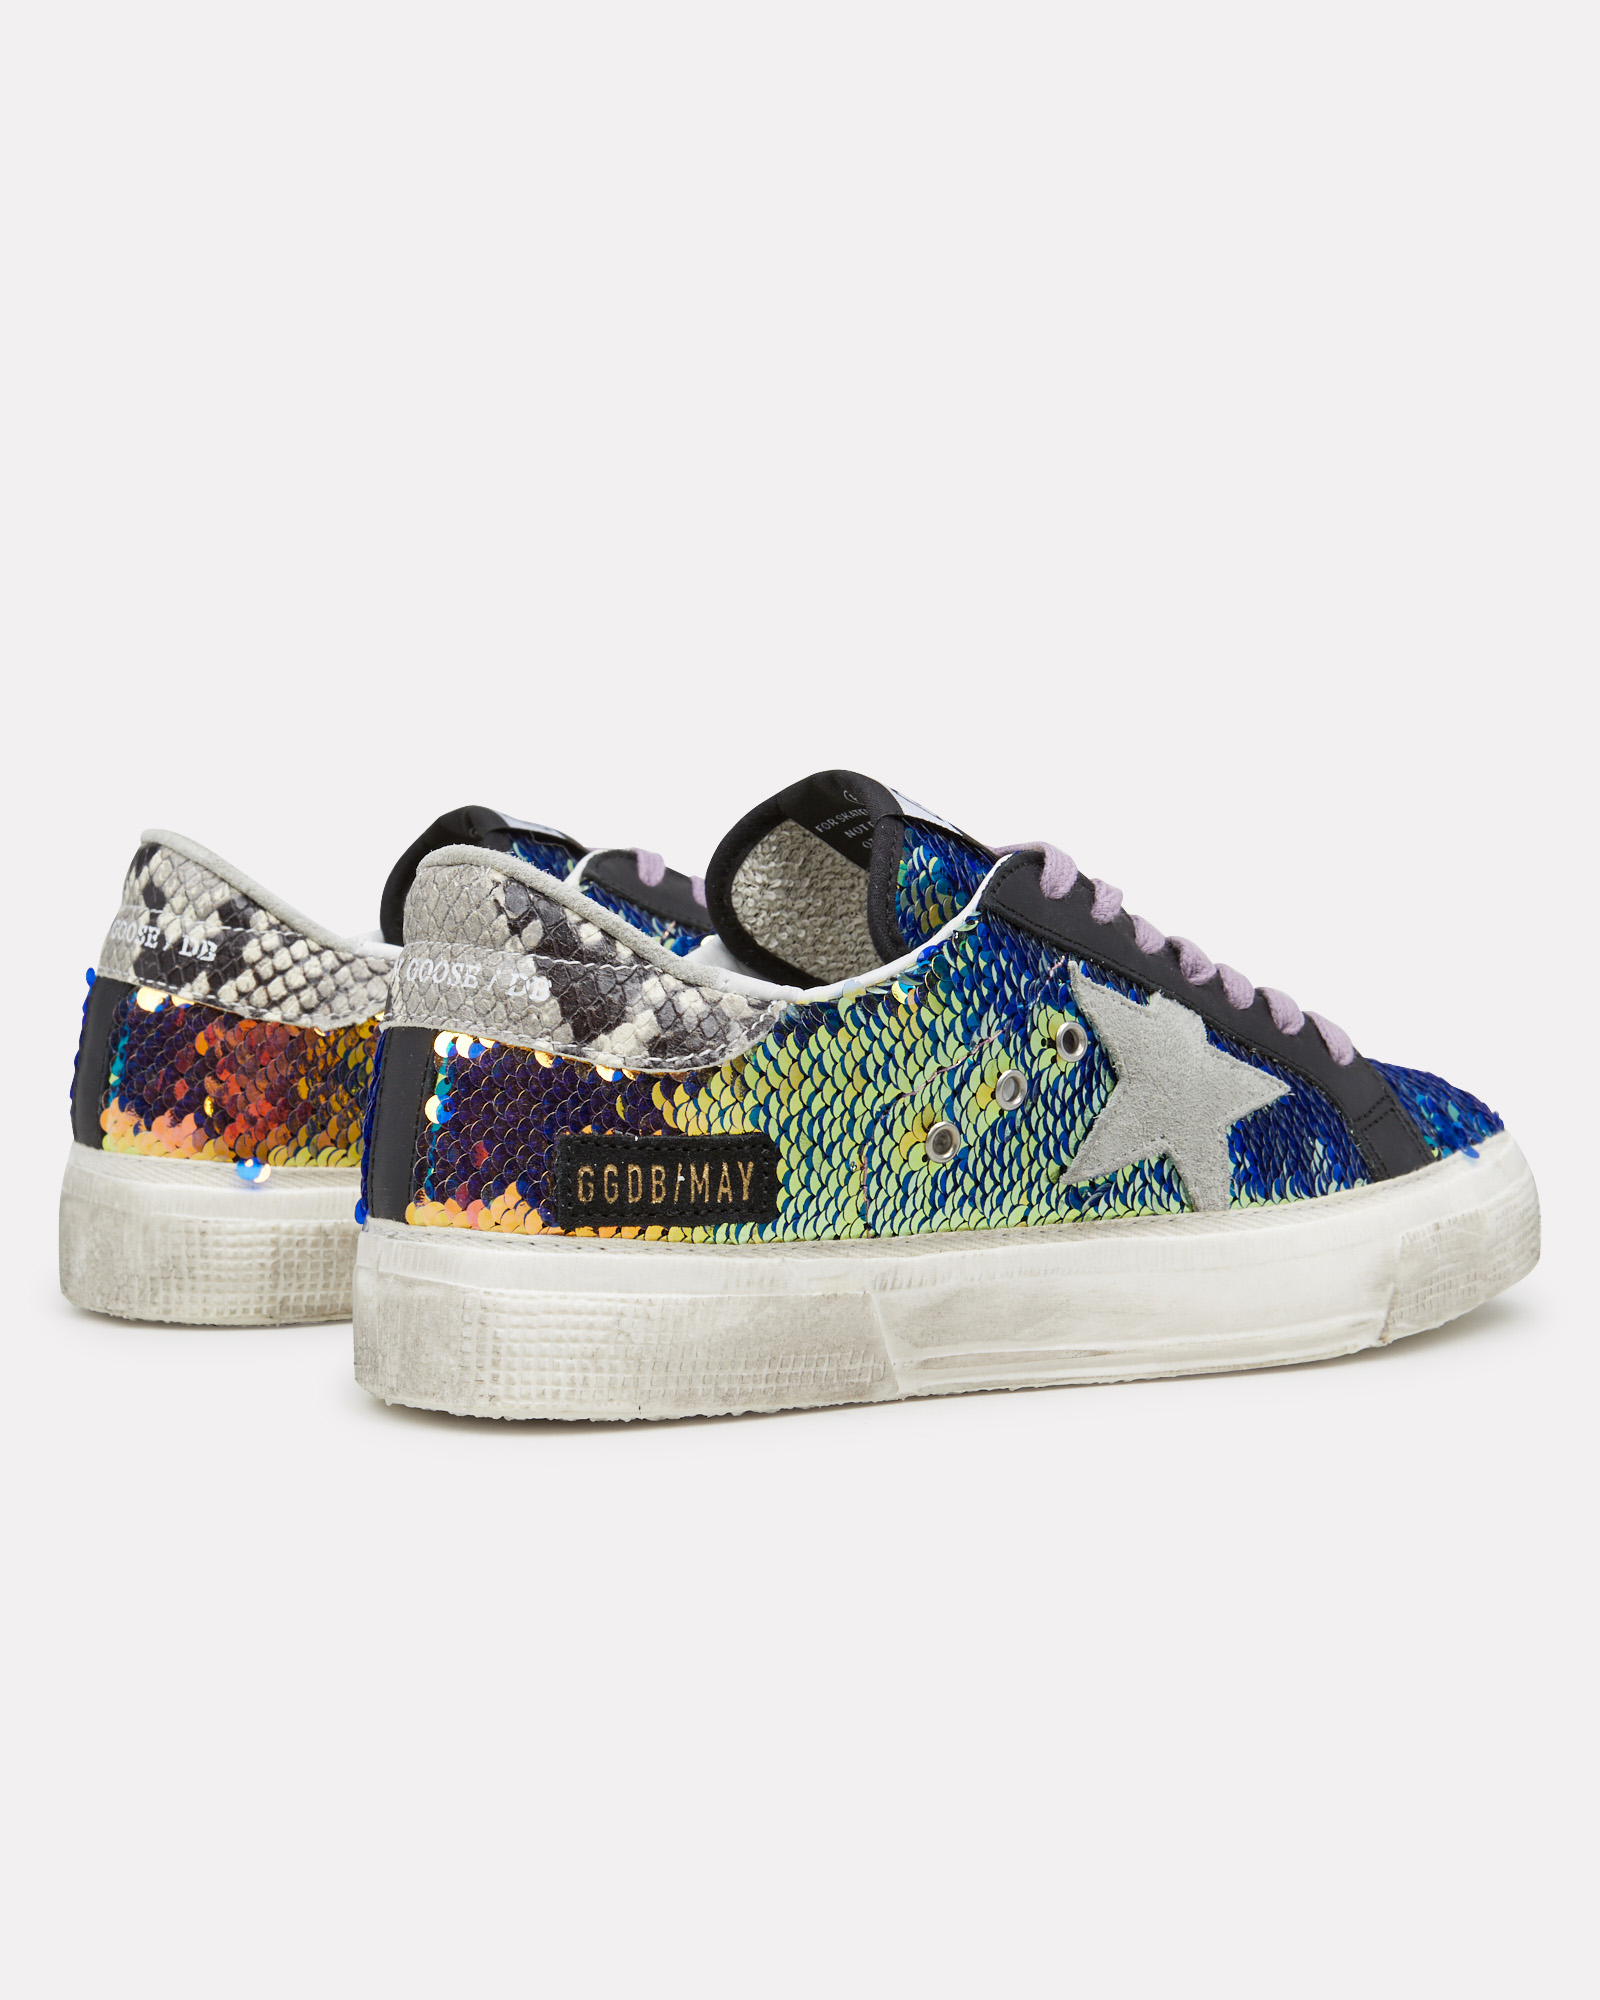 May Ice Star Sequin Sneakers | INTERMIX®